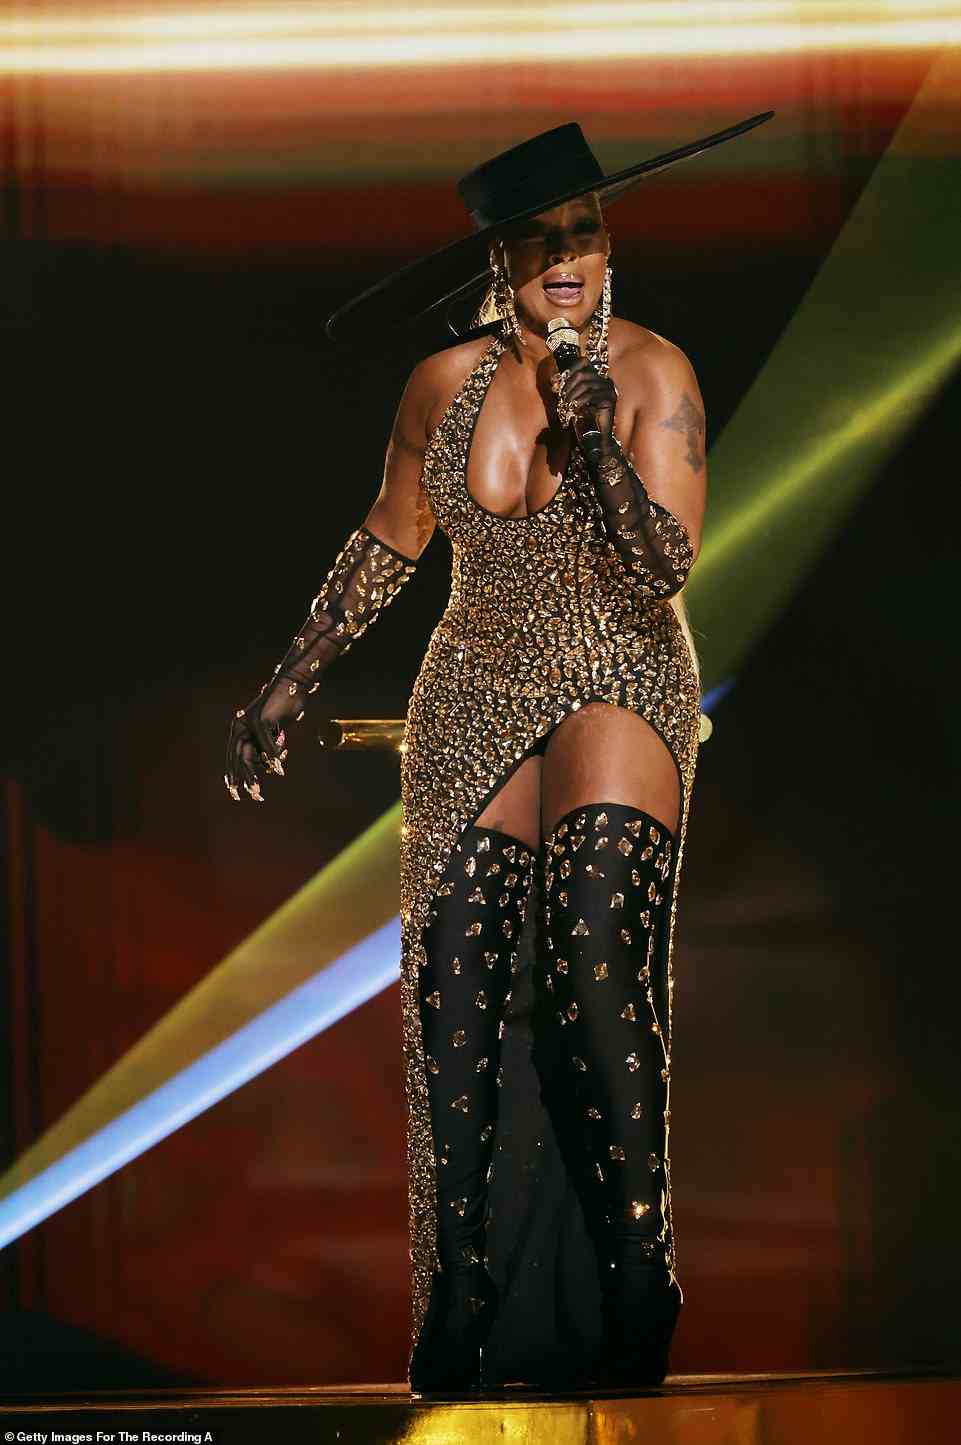 Sizzling: The Queen of R&B wore a plunging crystal-adorned form-fitting gown with a sizzling thigh-high slit and bedazzled black boots